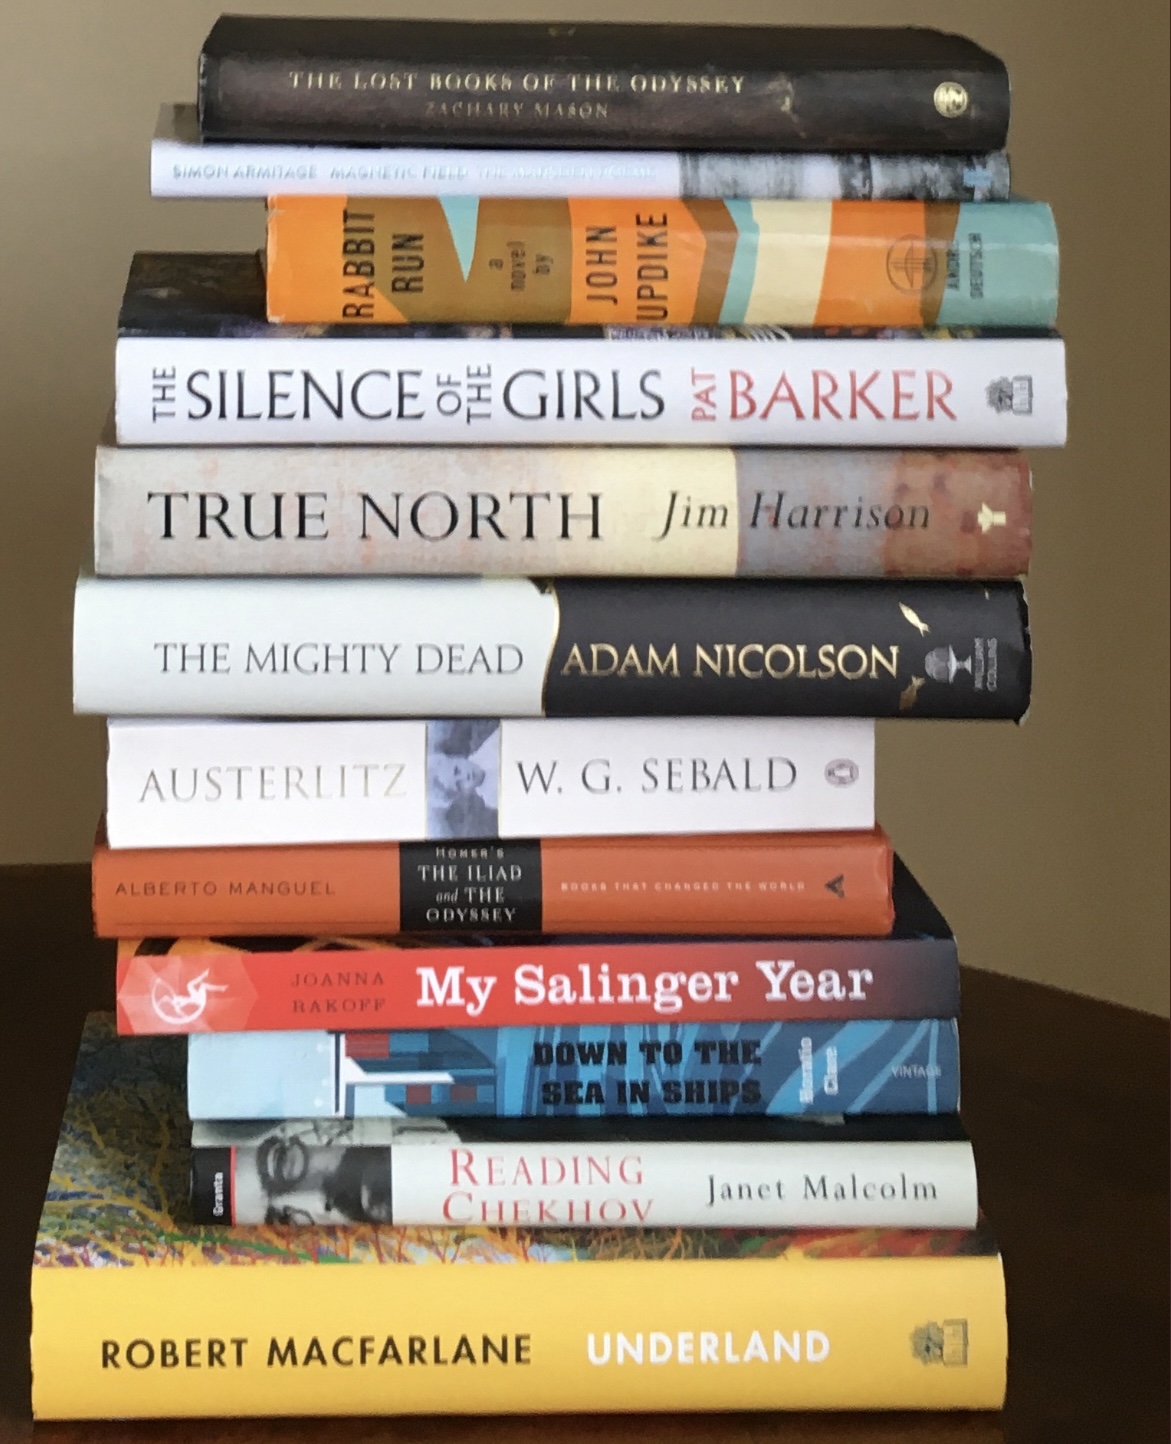 A pile of books stacked vertically